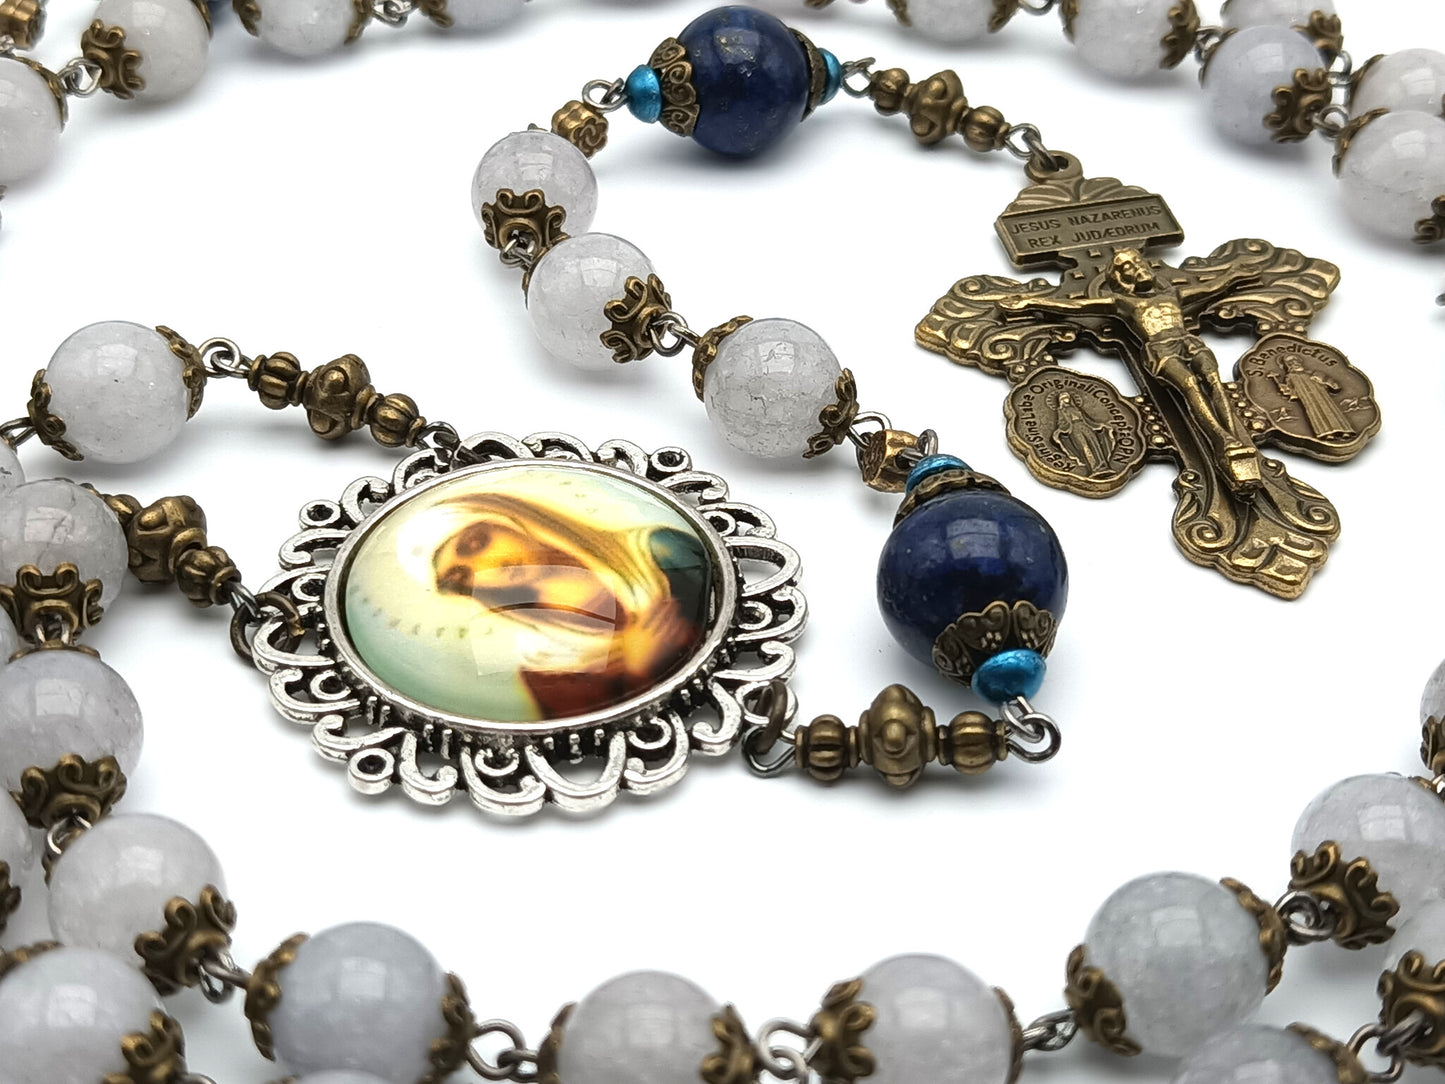 Twelve stars of Mary unique rosary beads with opal gemstone beads, bronze pardon crucifix, blue lapis pater beads and silver picture centre medal.